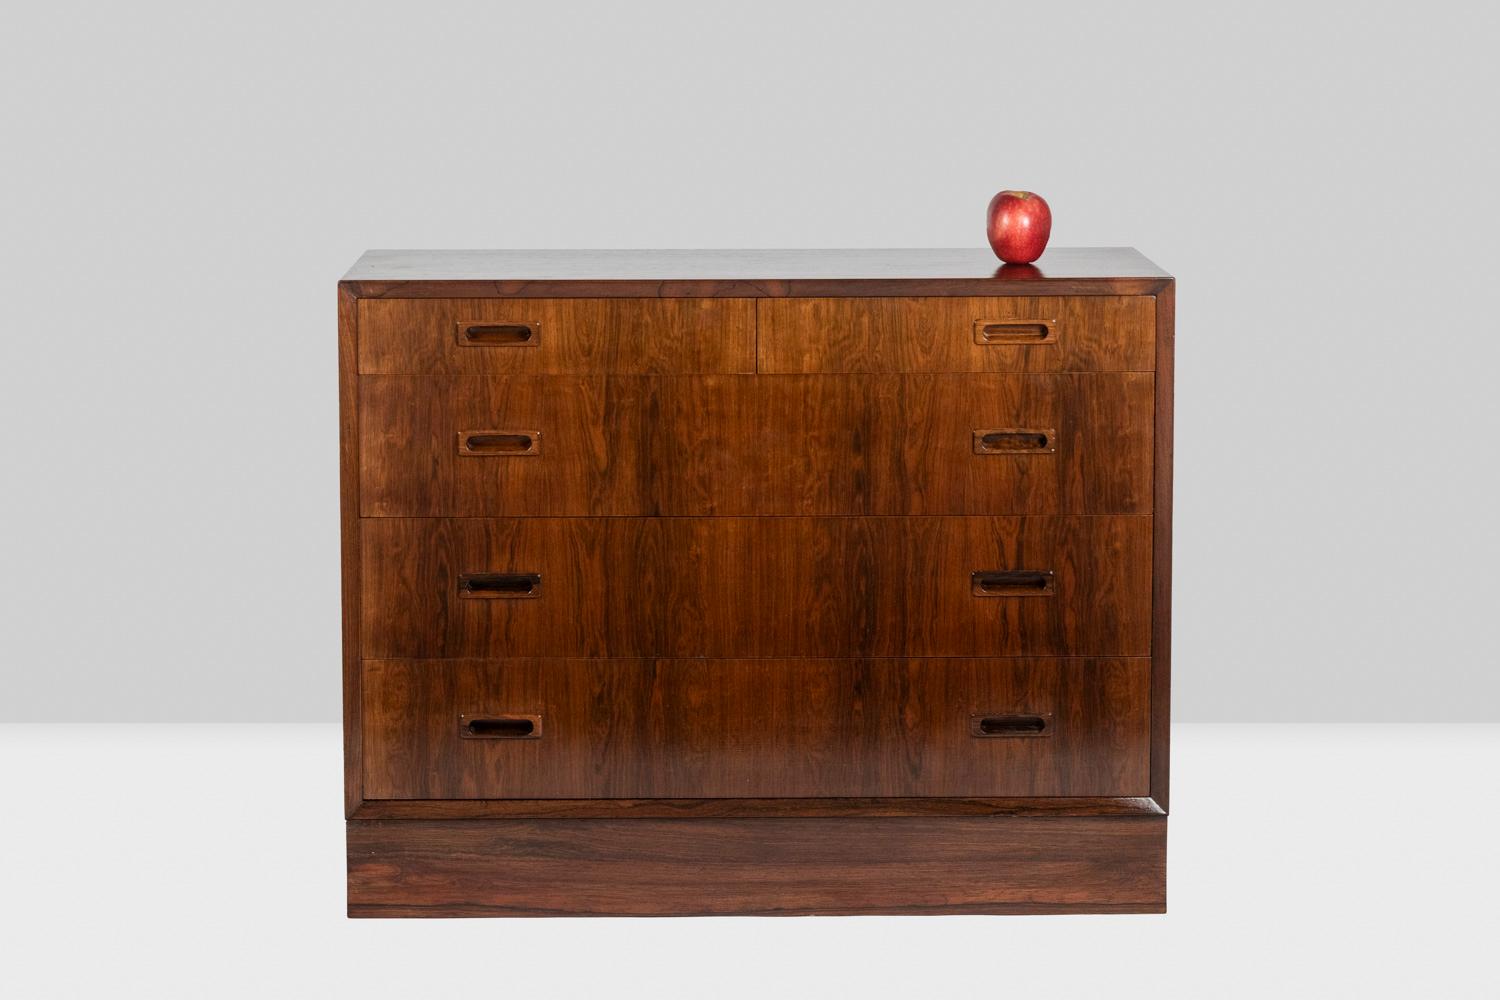 Chest of drawers in rosewood opening with four drawers on the front, the drawer frame with a beveled finish. Handles in a rectangular shape.

Danish work realized in the 1970s.